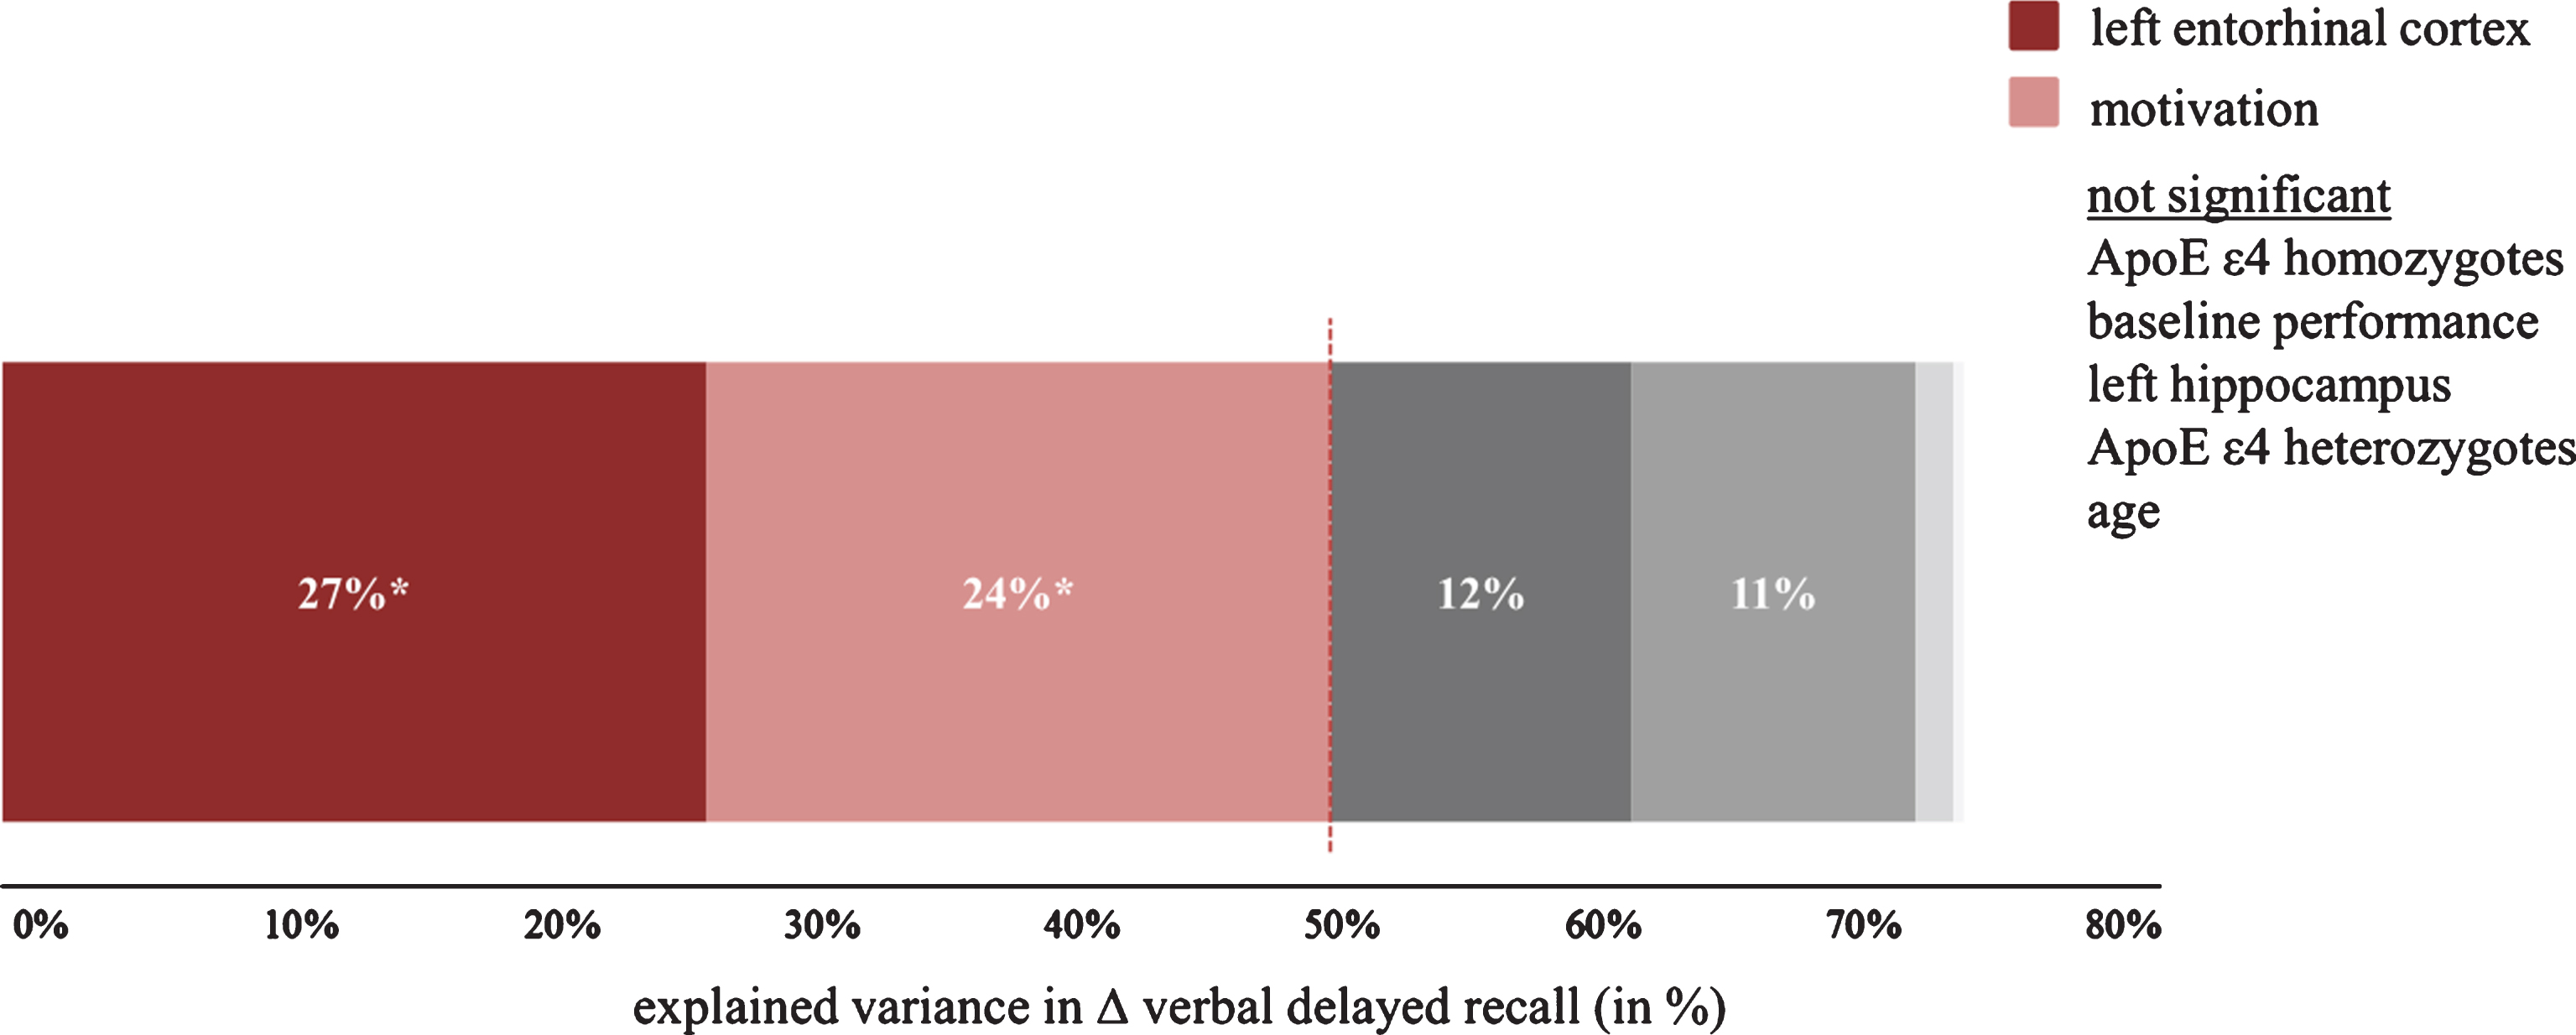 Explained variance for the prediction of verbal delayed recall change after cognitive training (i.e., pre- to post-intervention). Significant predictors are depicted in different shades of red, while grey color indicates a non-significant predictor. Please note that some non-significant predictors are invisible due to a very small amount of explained variance.